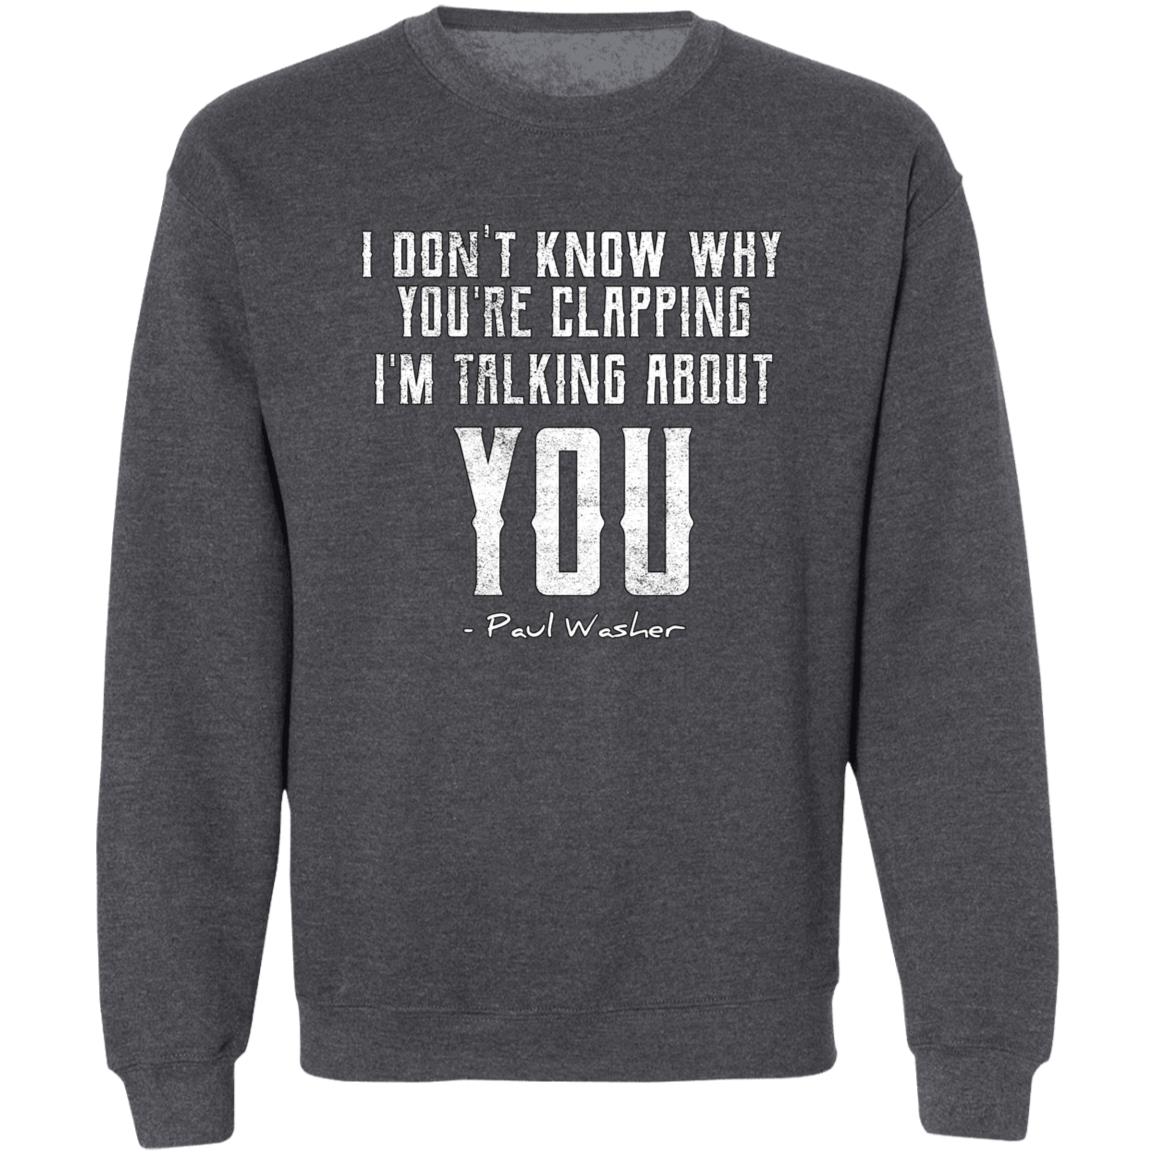 I Don't Know Why You're Clapping (Unisex Sweatshirt)